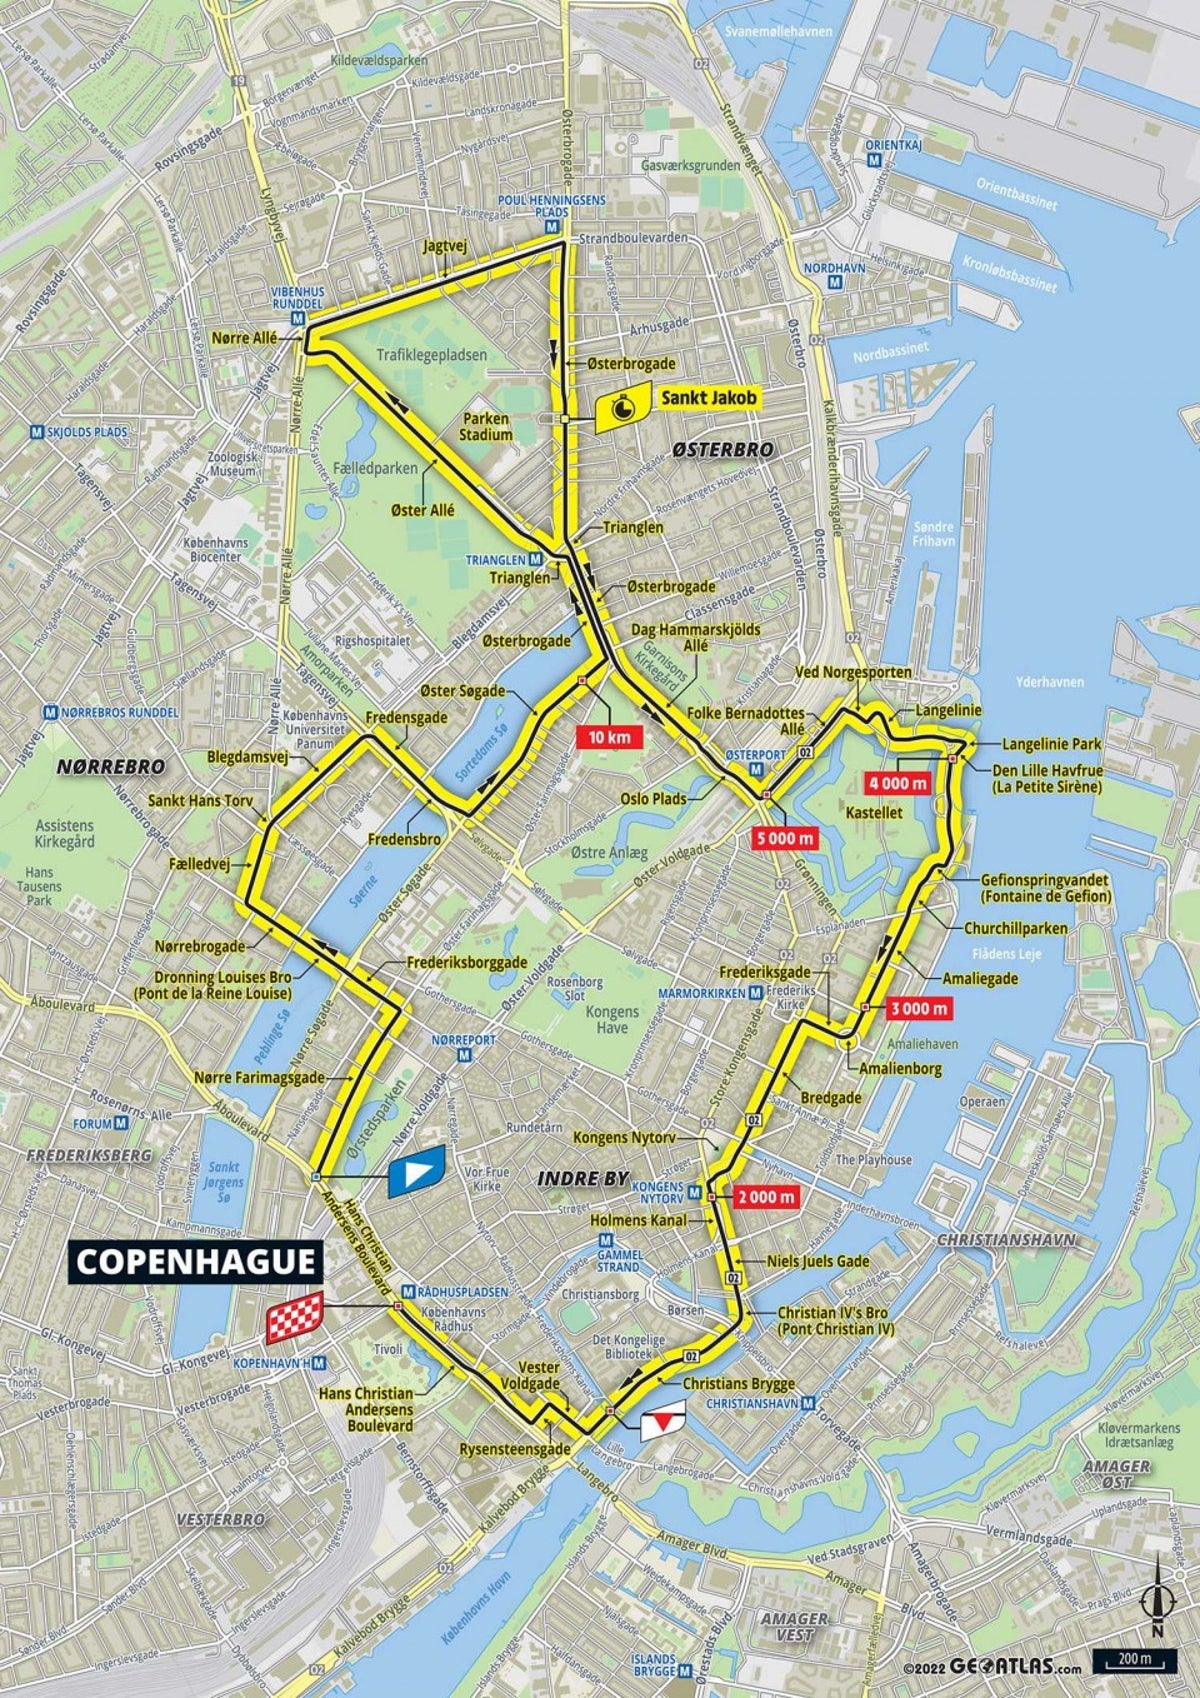 Tour de France 2022 stage 1 preview: Route map and profile of Copenhagen time trial